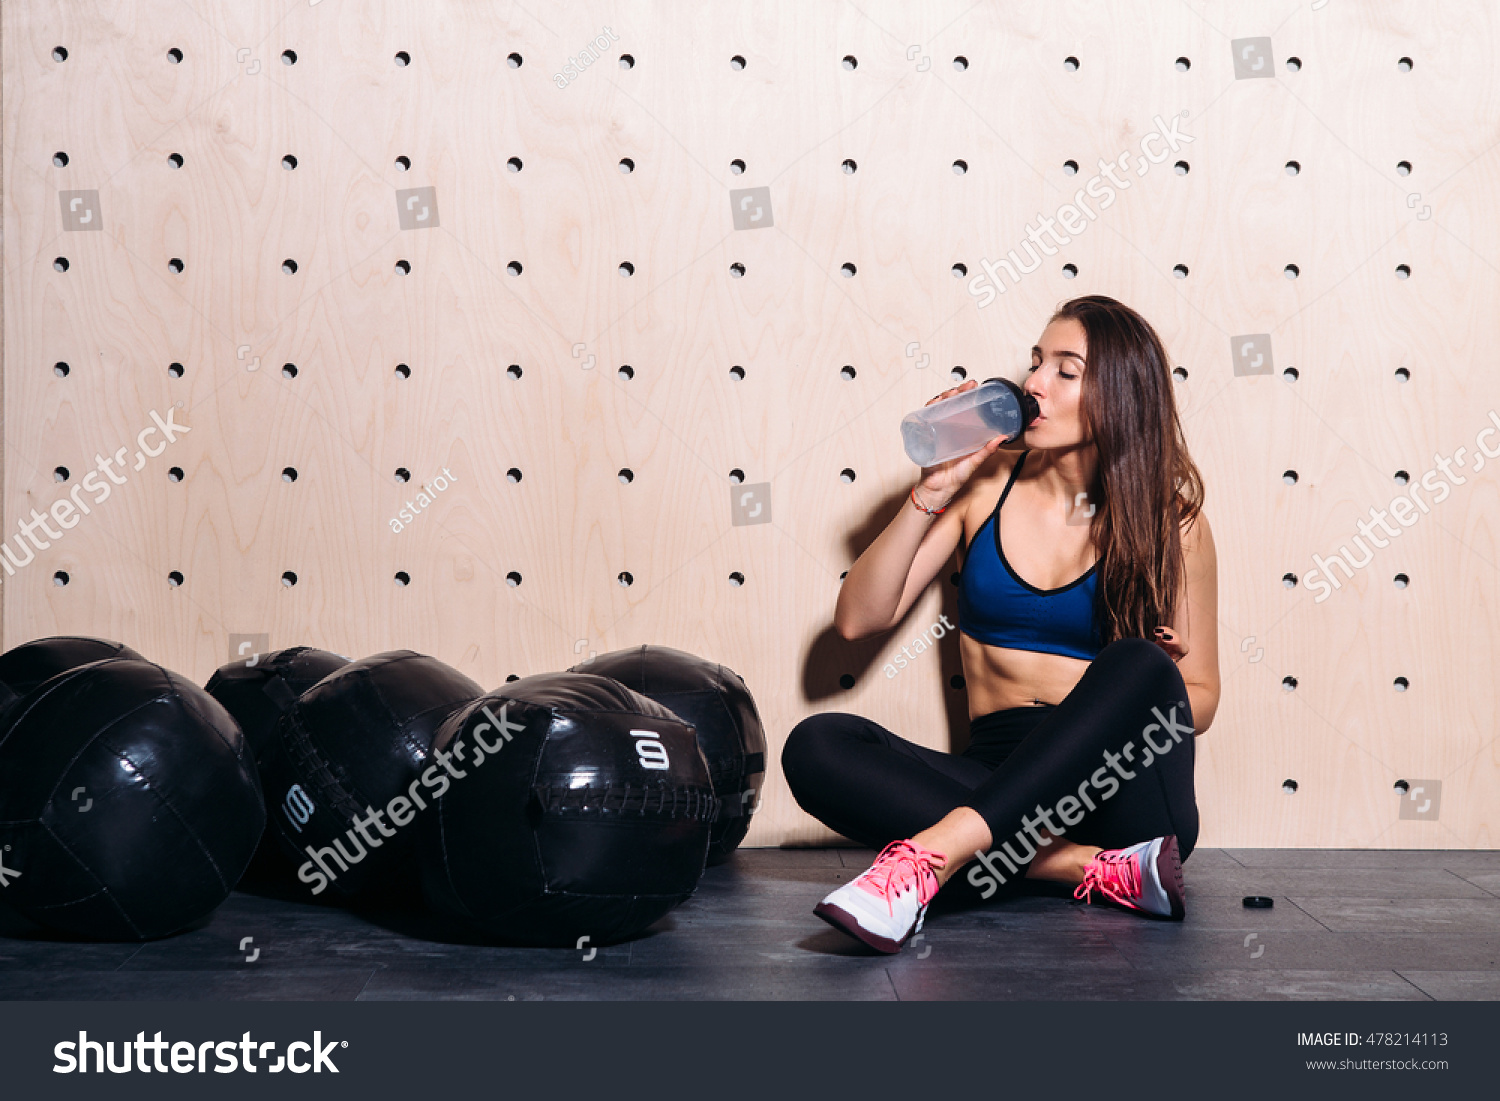 Girl drinking water at the gym #478214113